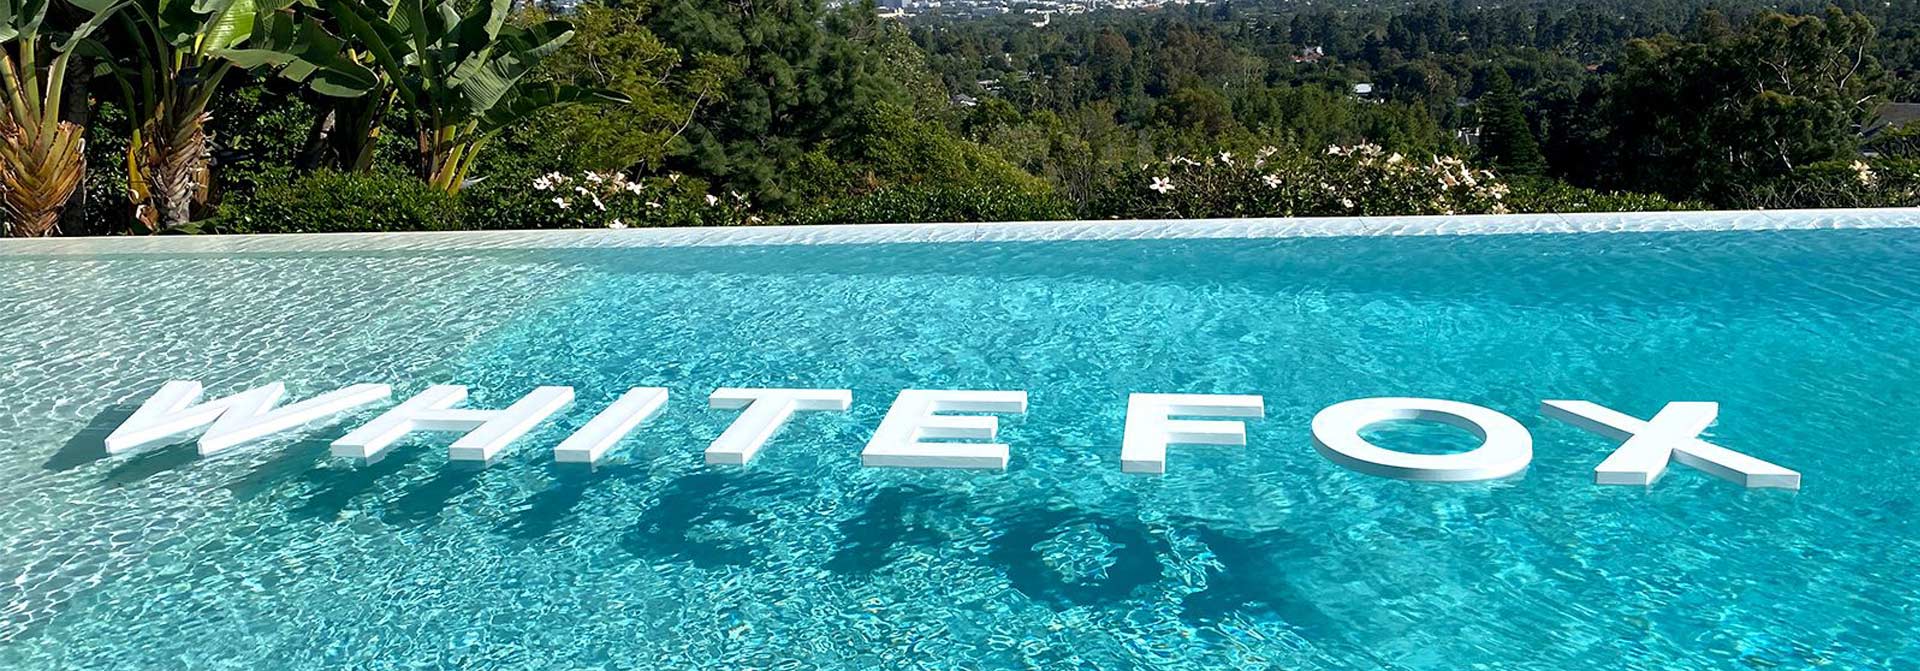 Event branding with floating letters in a pool